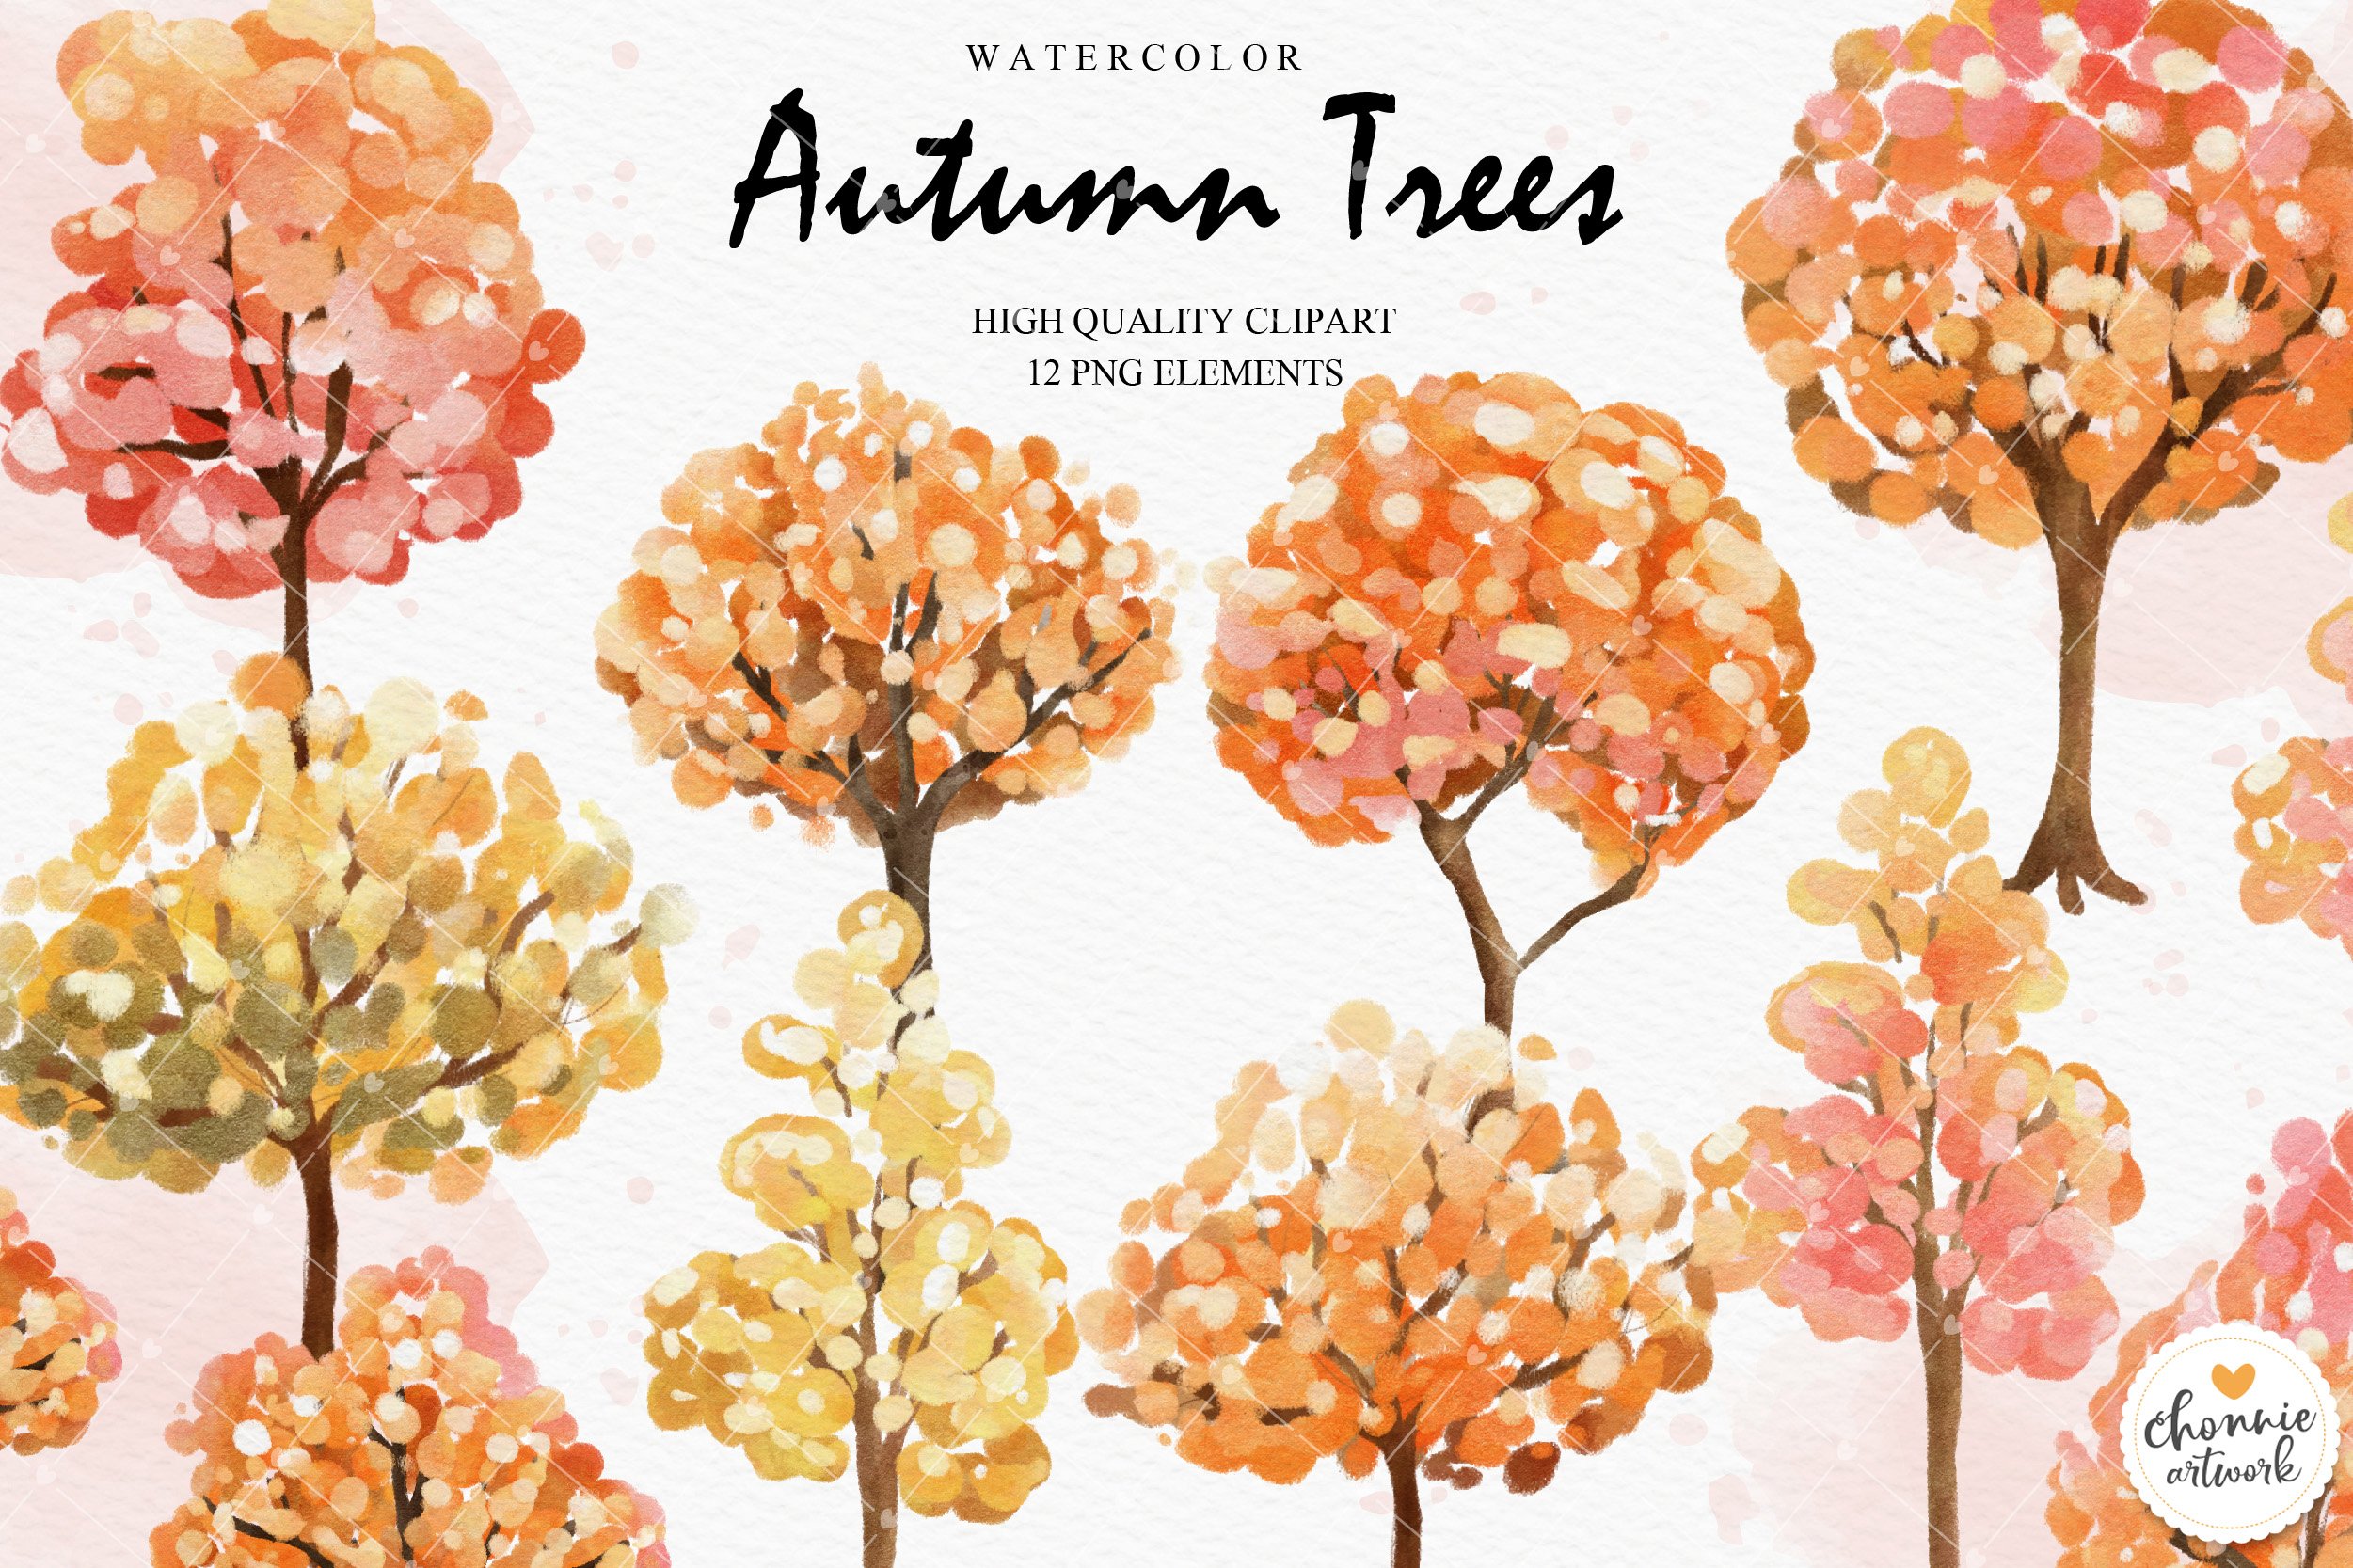 Autumn trees clipart cover image.